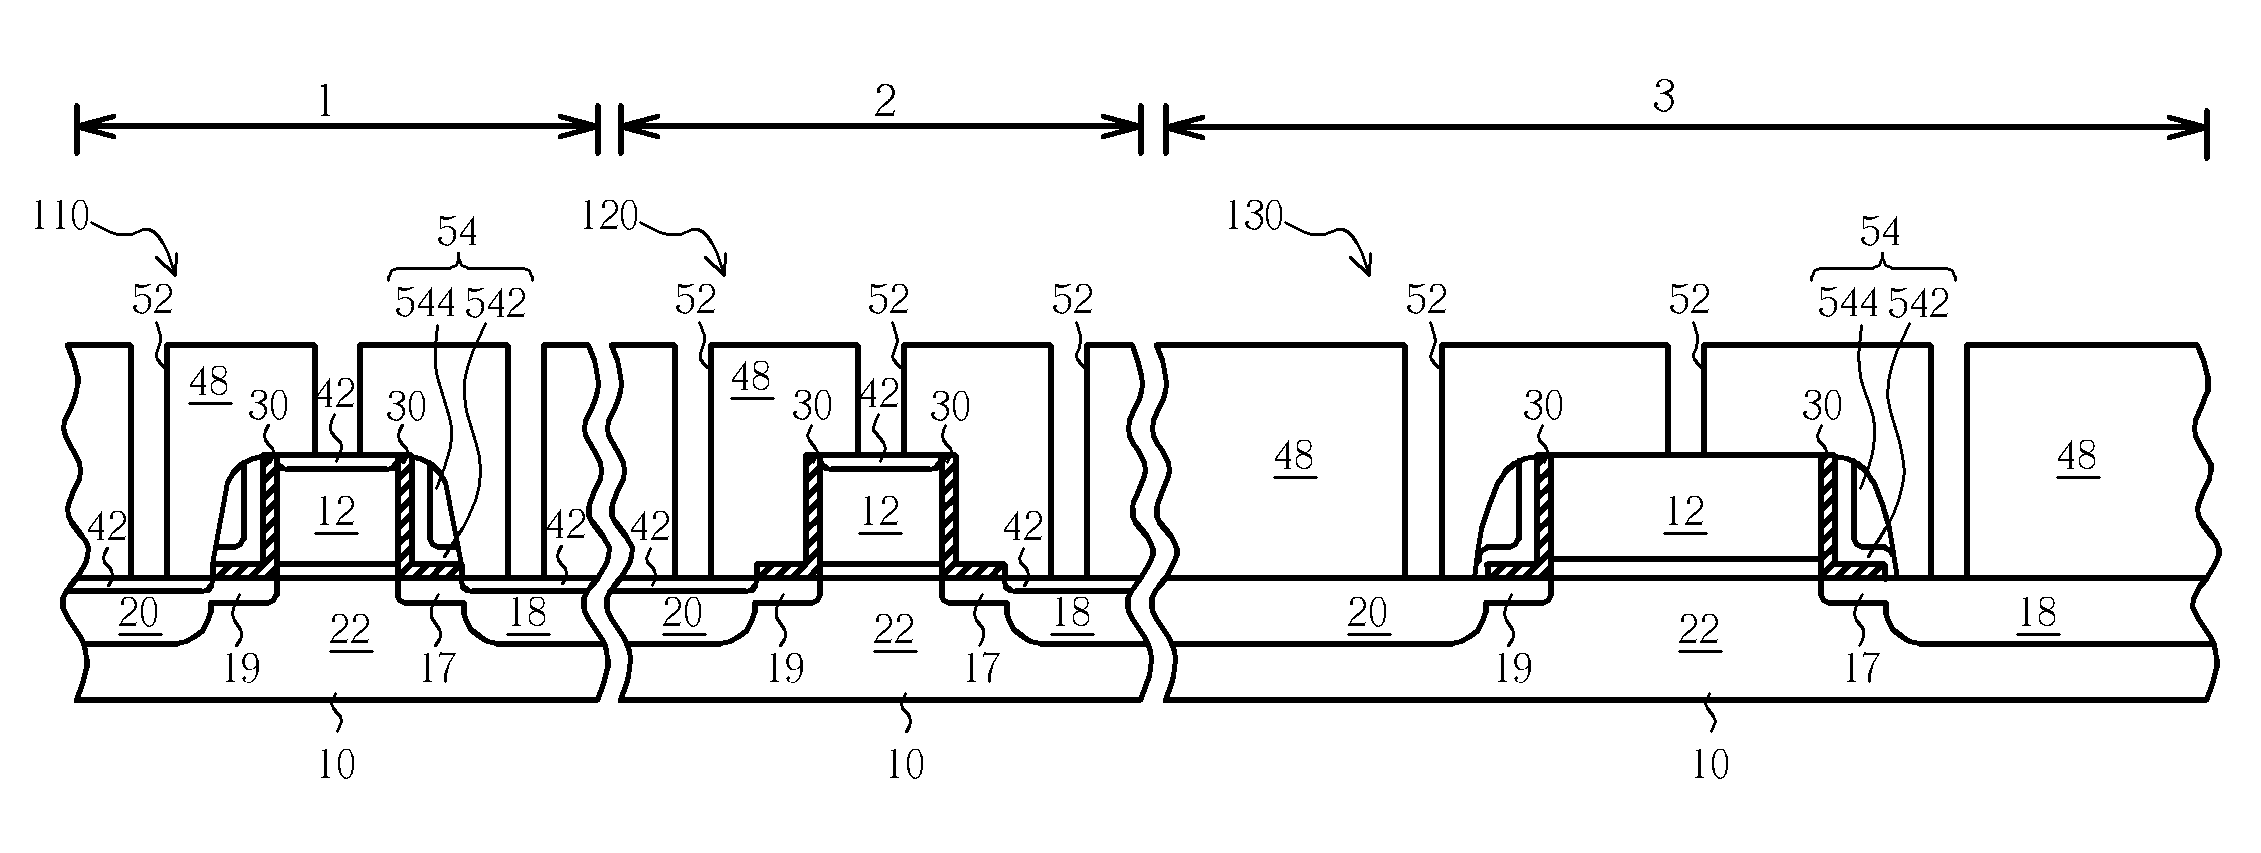 Metal-oxide-semiconductor transistor and method of forming the same